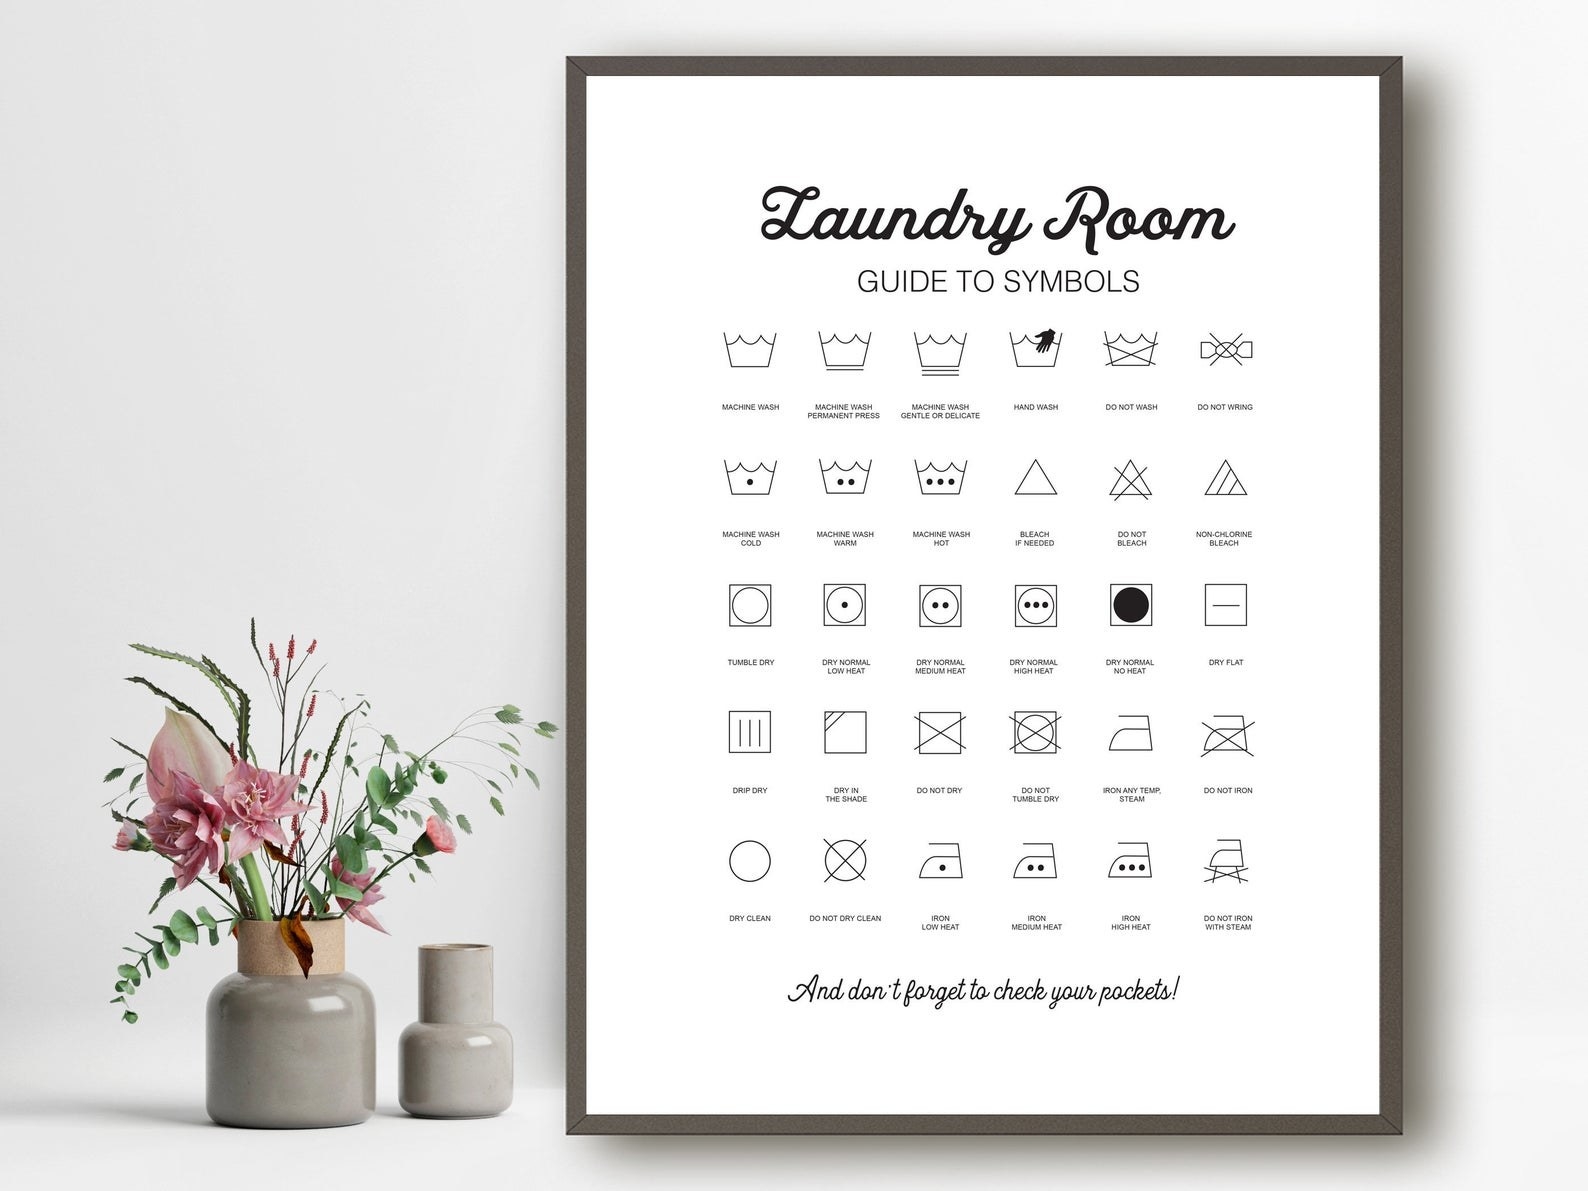 laundry symbols and what they mean